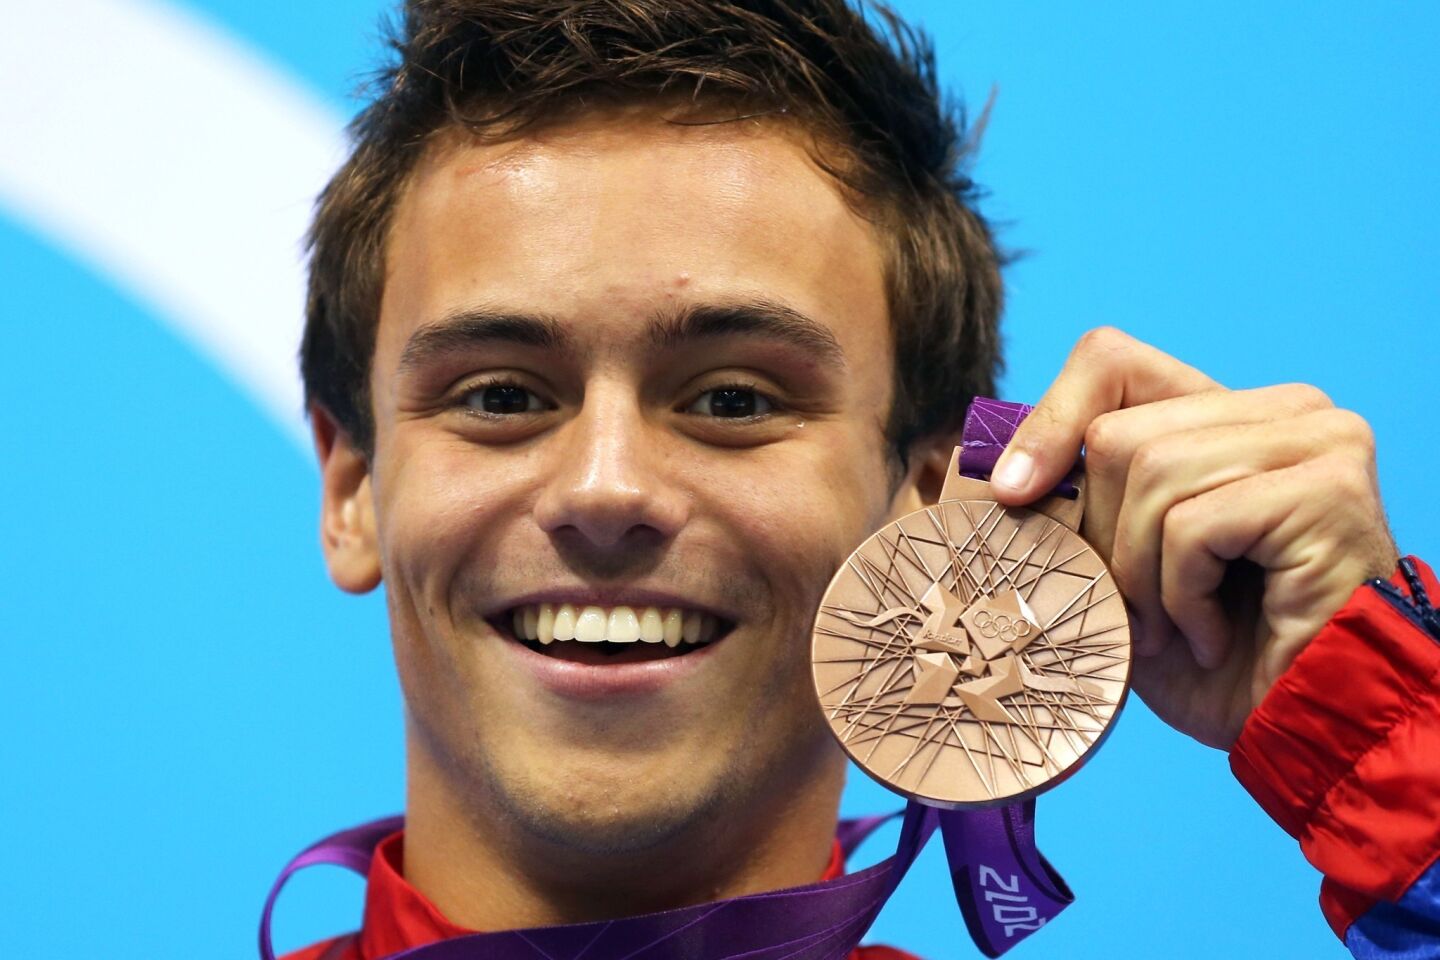 Nineteen-year-old British Olympic diving bronze medalist Tom Daley revealed through a YouTube video that he's in a relationship with a man and has been since spring.